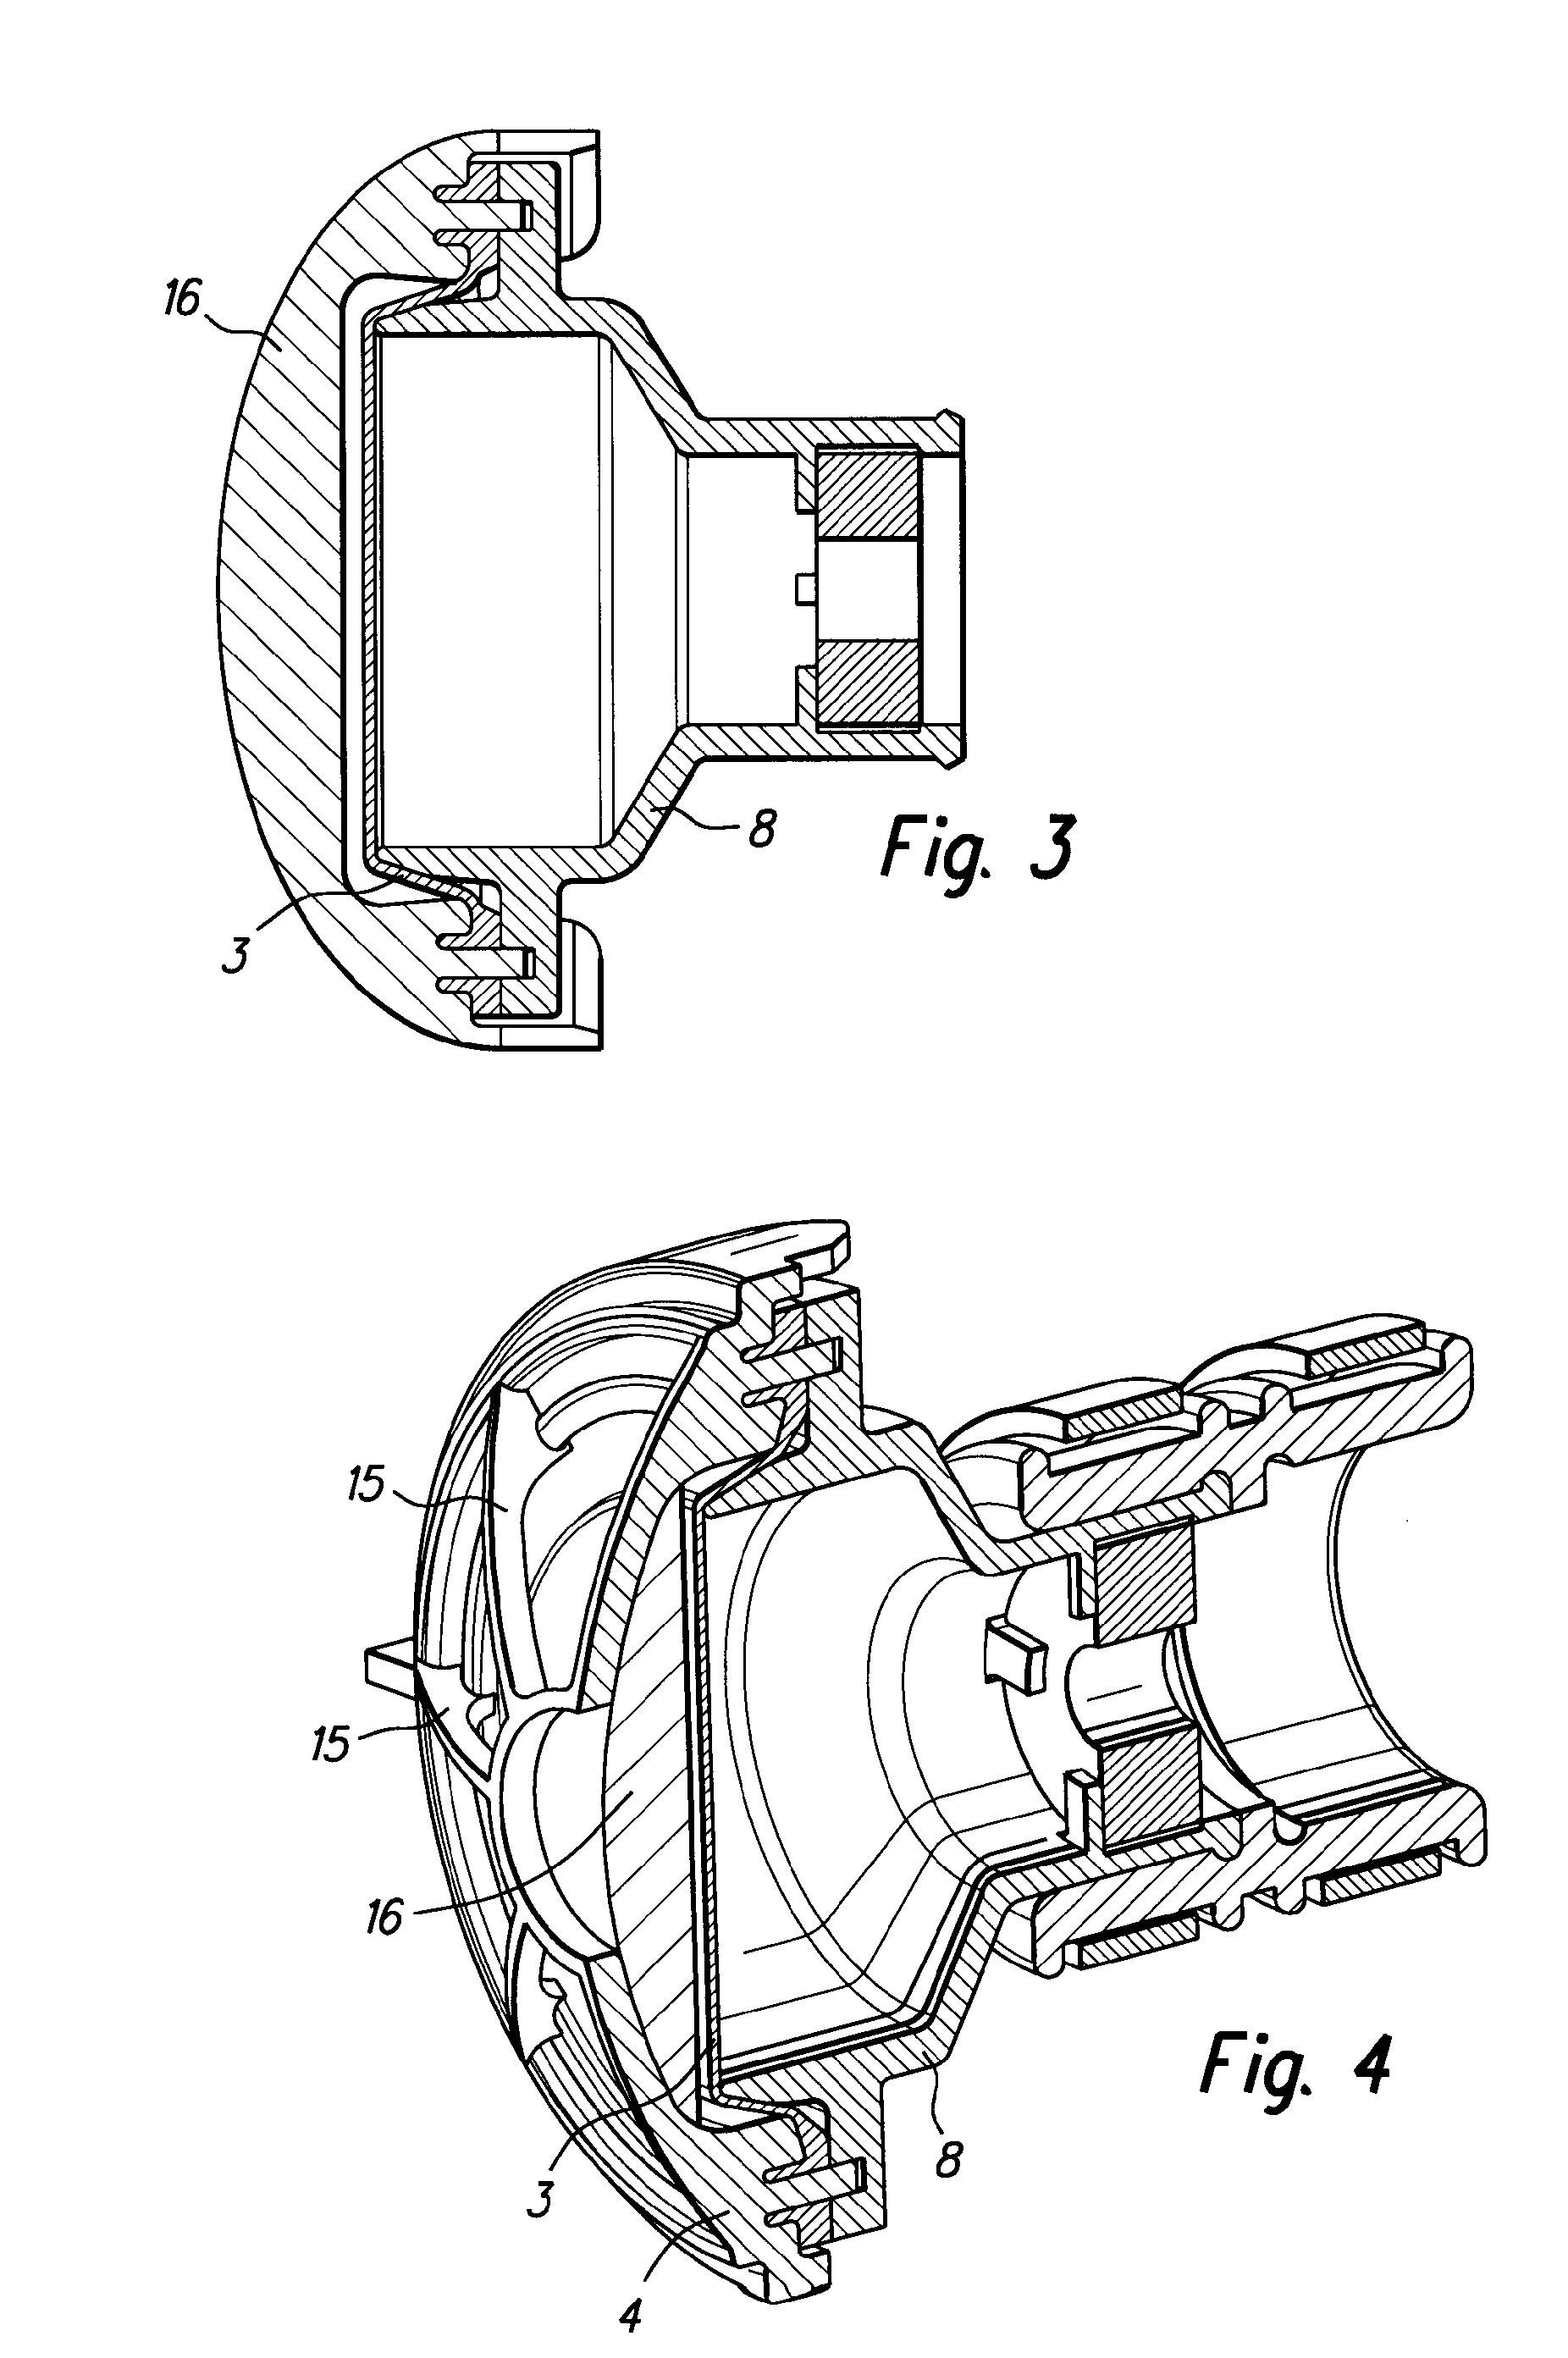 Device for Noise Transmisson in a Motor Vehicle